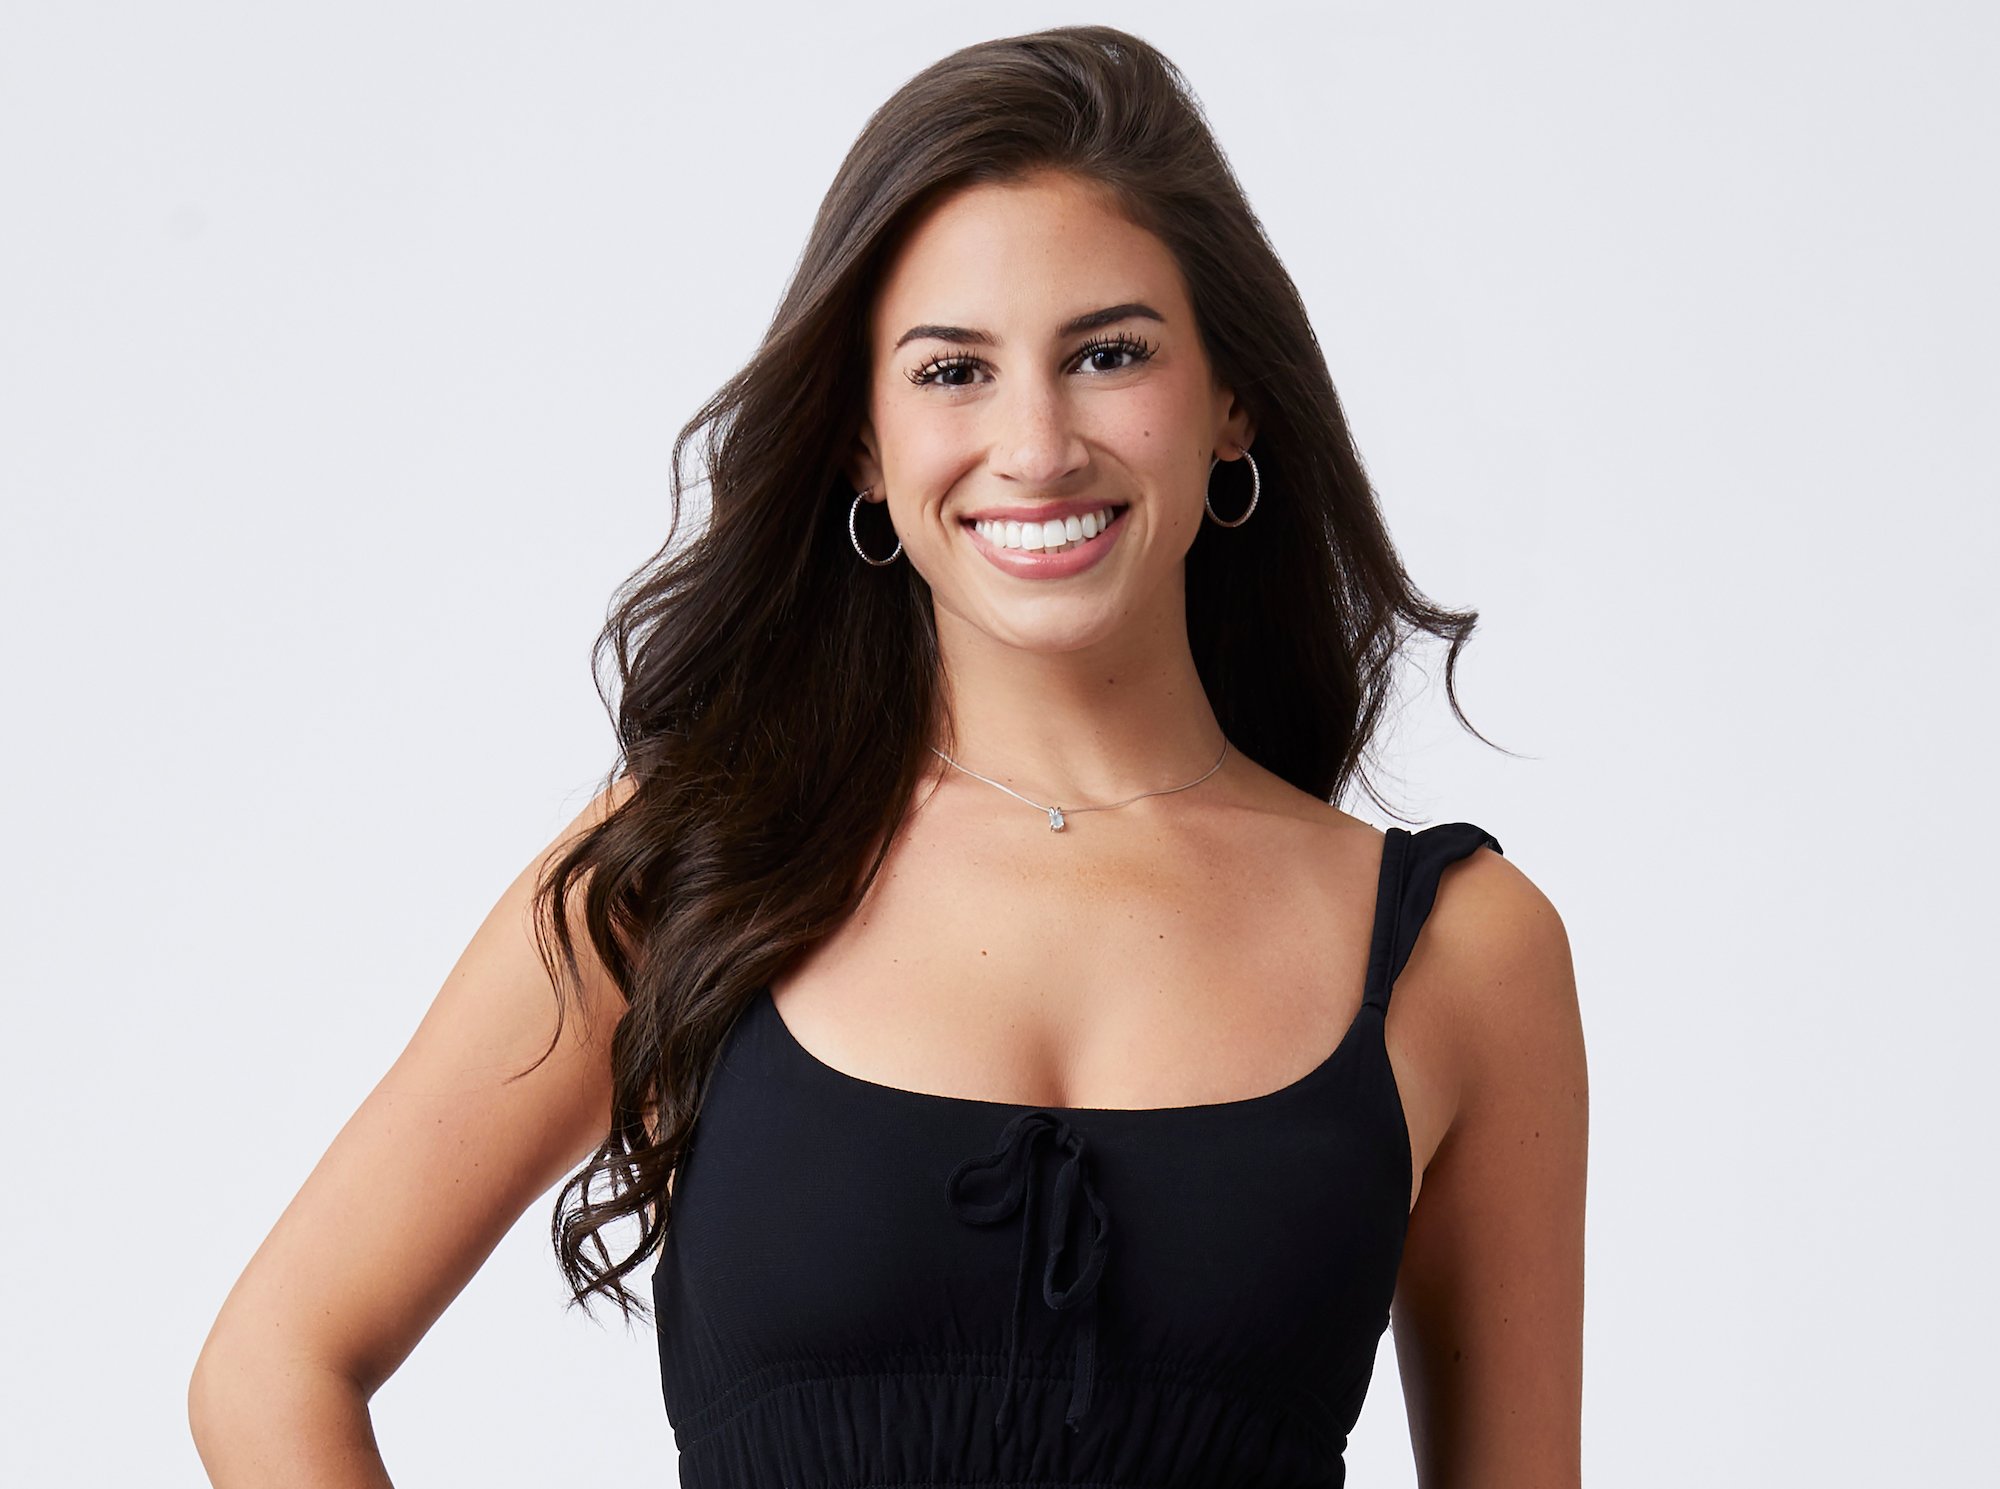 'The Bachelor' 2022 contestant Genevieve Parisi wearing a black sleeveless top in a promotional image for the show.